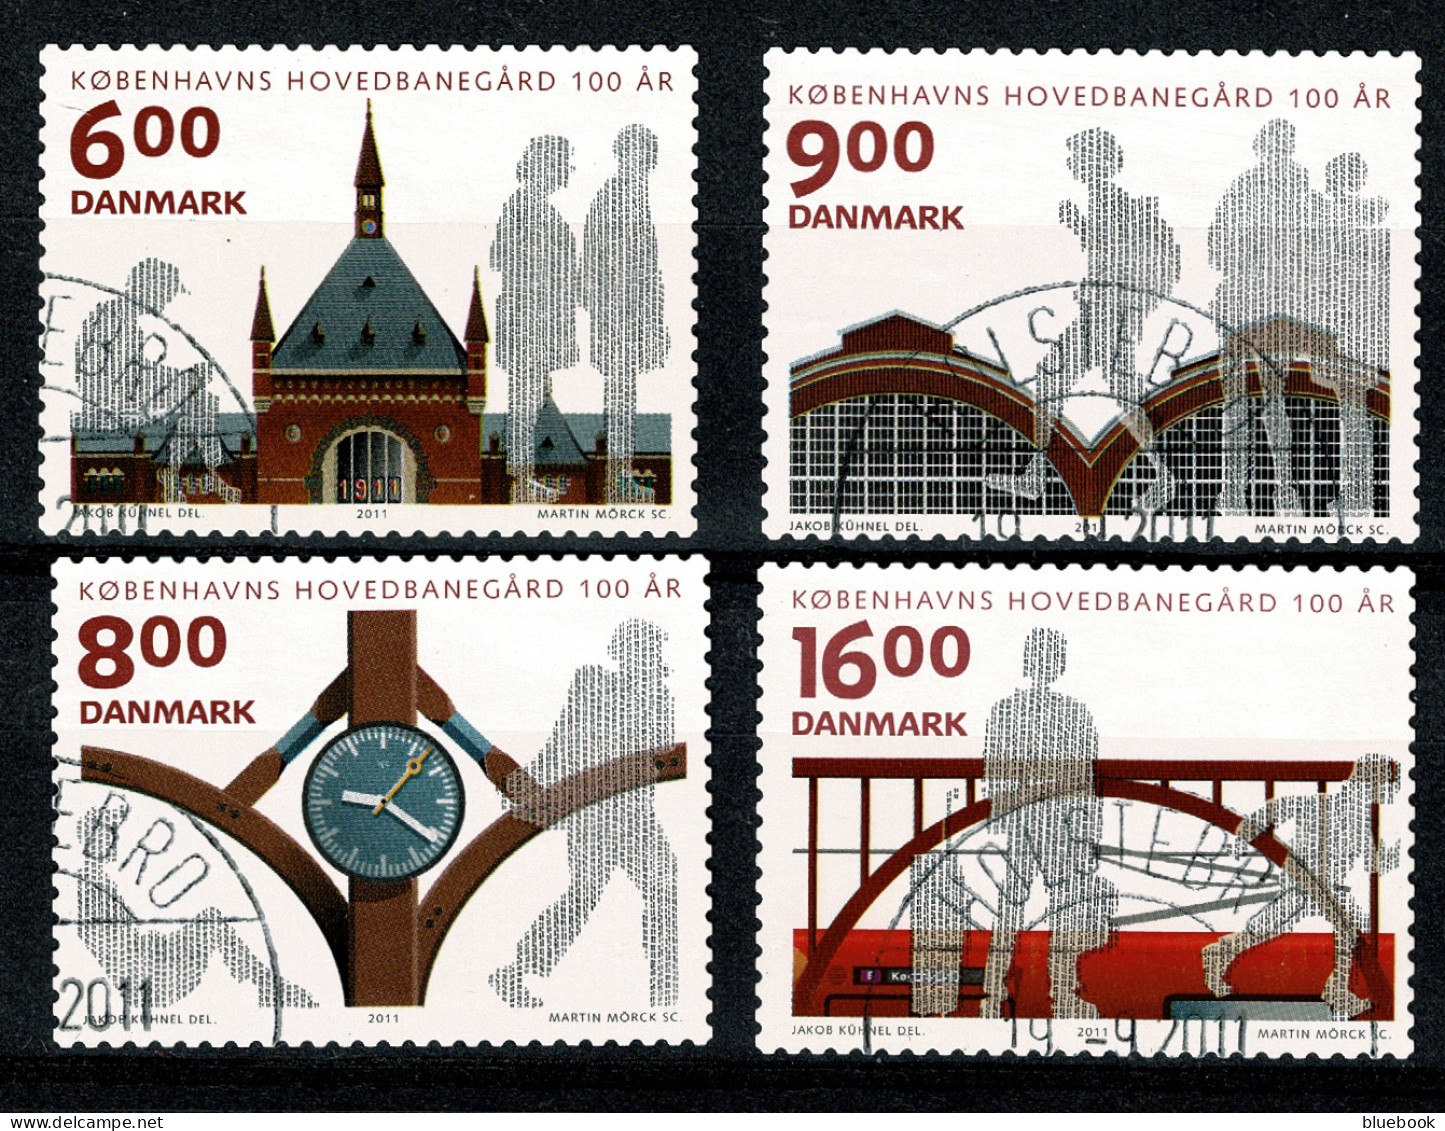 Ref 1614 - 2011 Denmark Cop. Central Station - Fine Used- SG 1663/6 Cat £19 - Used Stamps